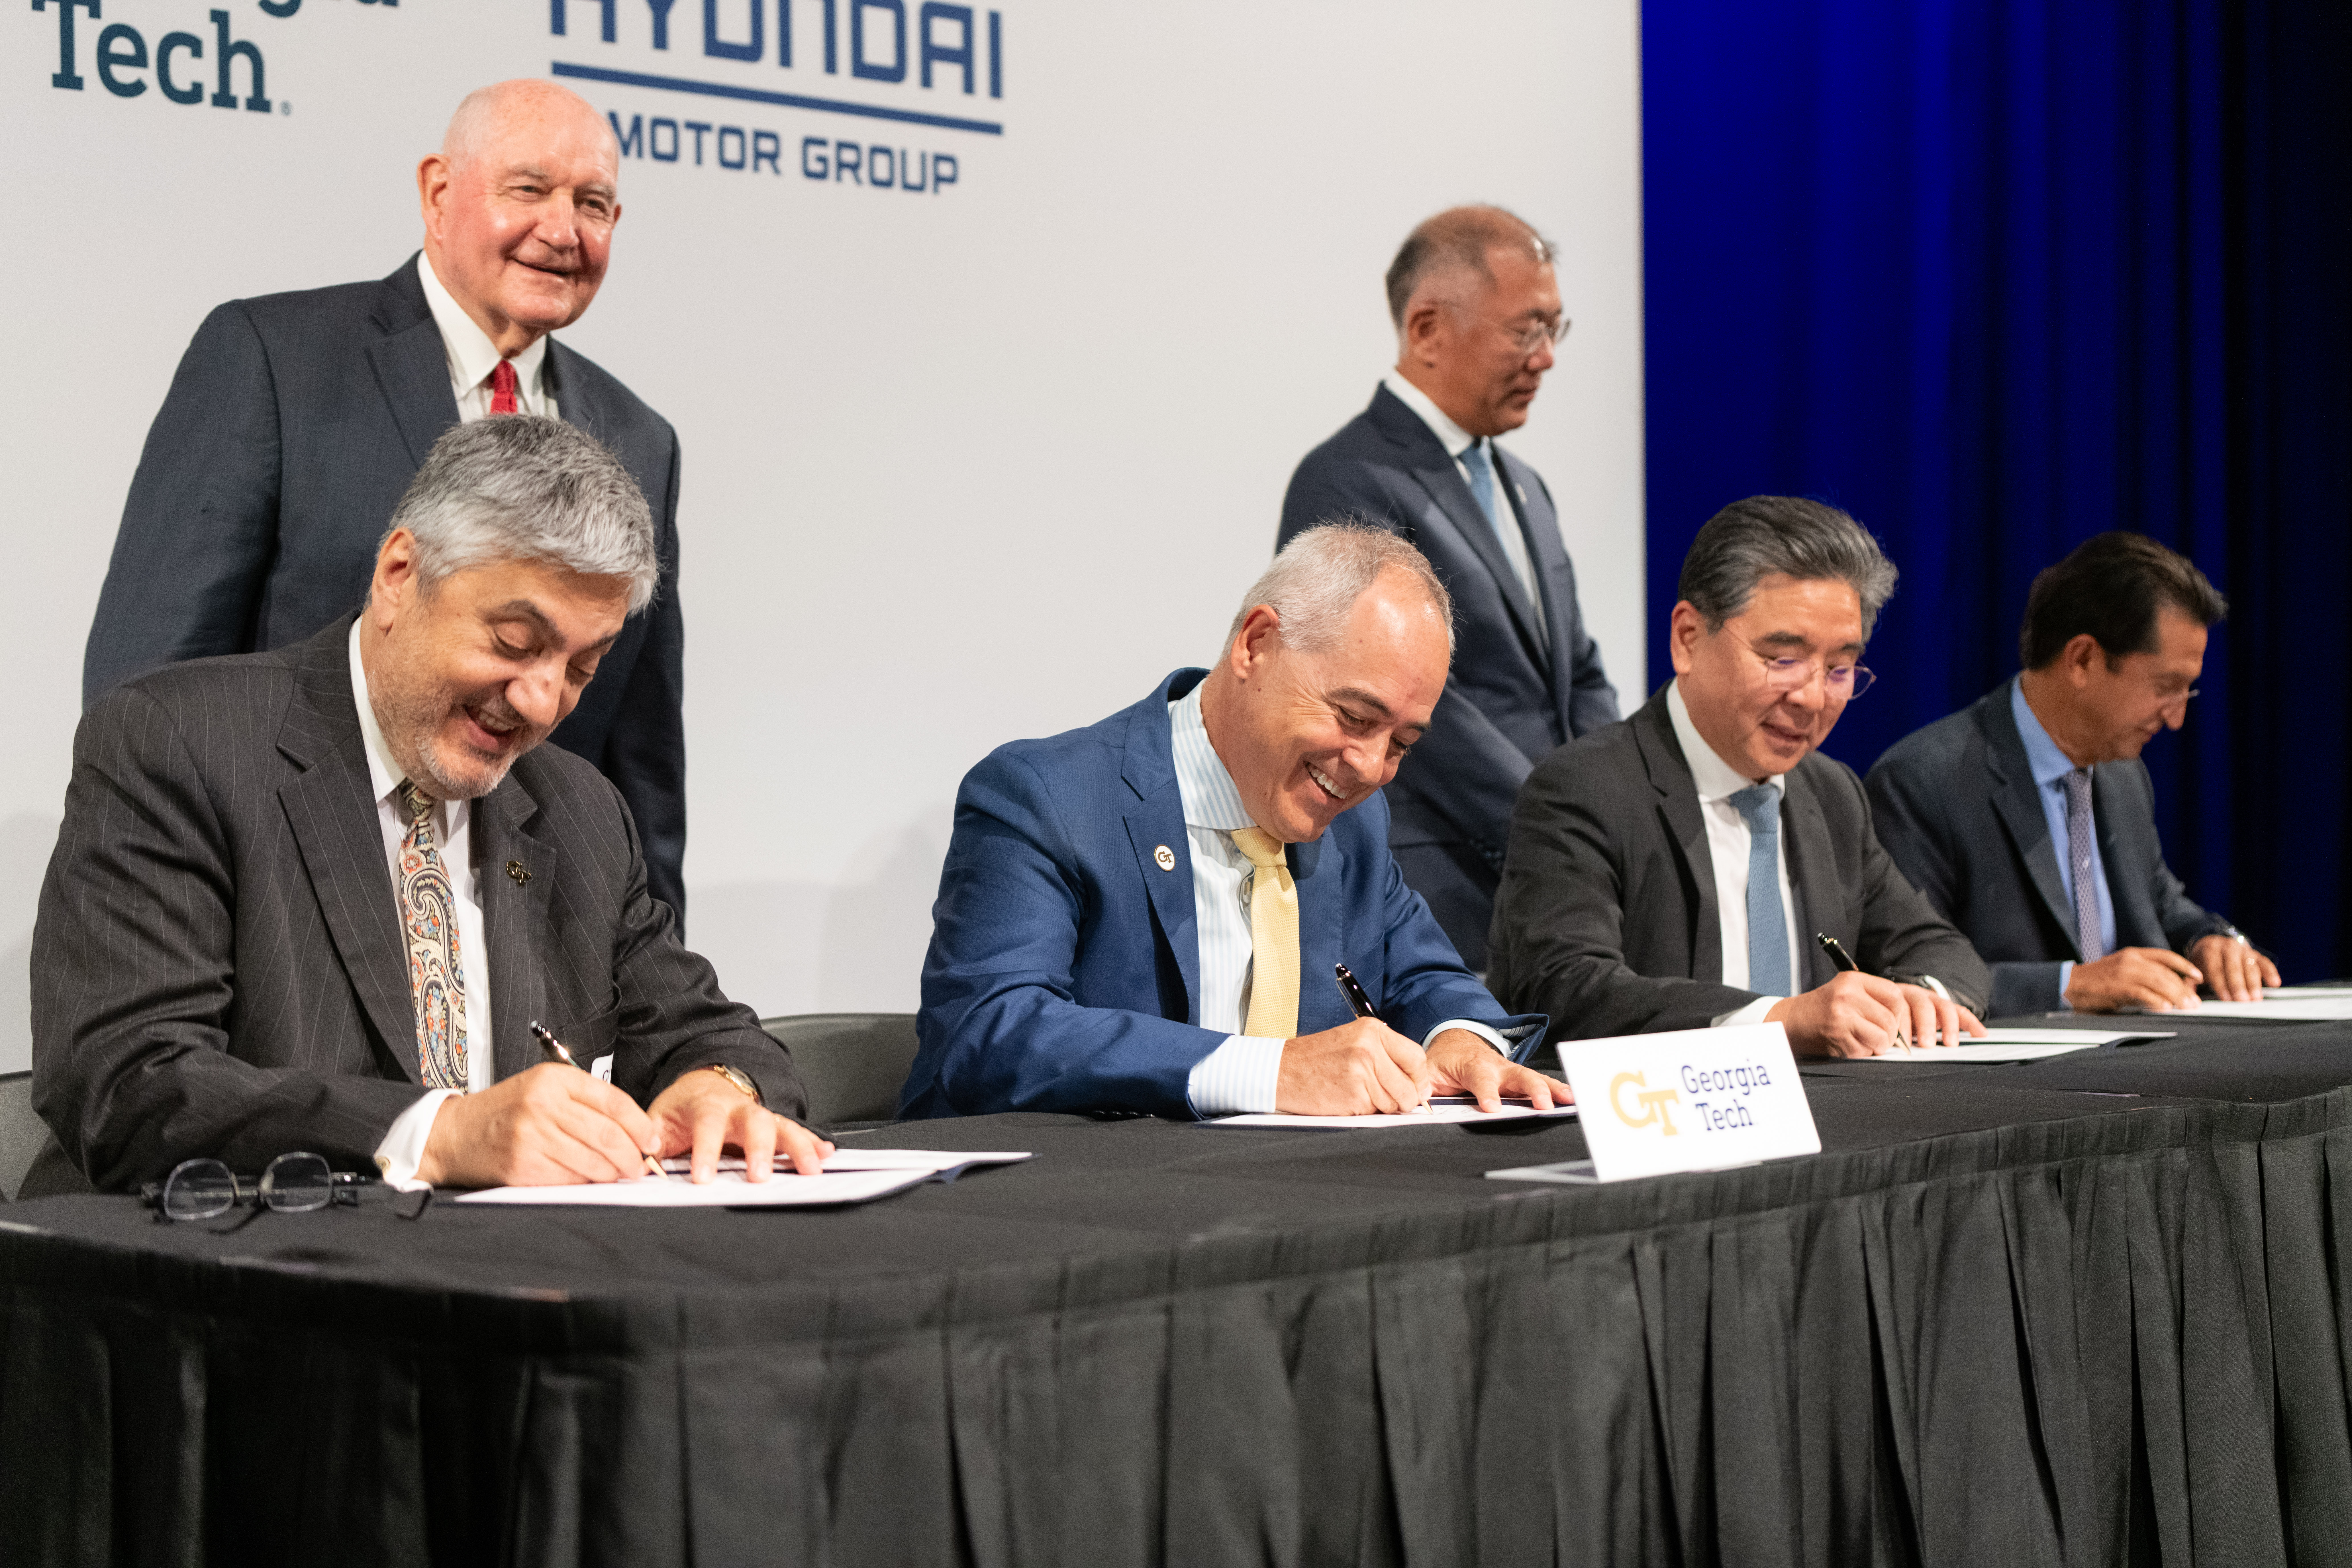 USG Chancellor Sonny Perdue looks on as Georgia Tech President Ángel Cabrera and Executive Vice President for Research Chaouki Abdallah sign the memorandum of understanding with Hyundai officials, signifying the beginning of a transformative partnership. 